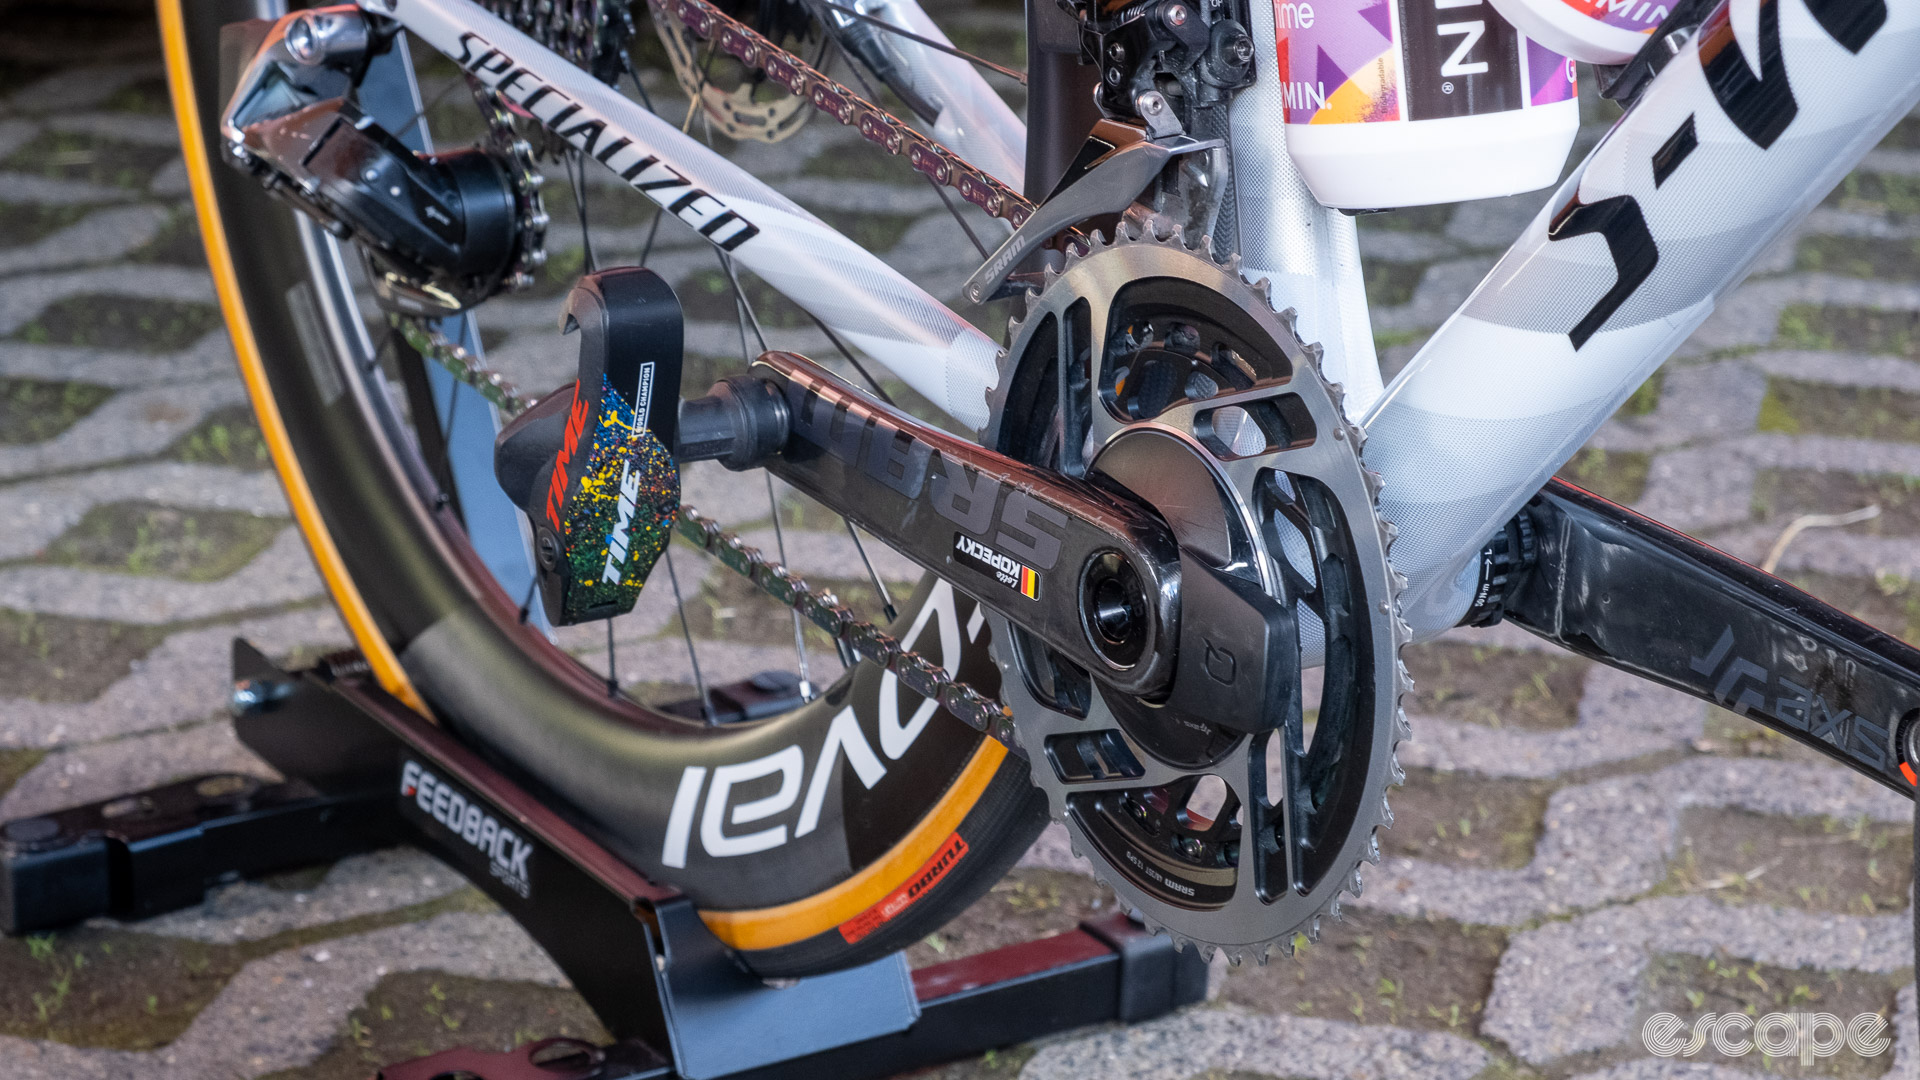 The photo shows Time pedals with a rainbow themed paint job on the pedal body and a crankset with her name sticker on the crank arm.